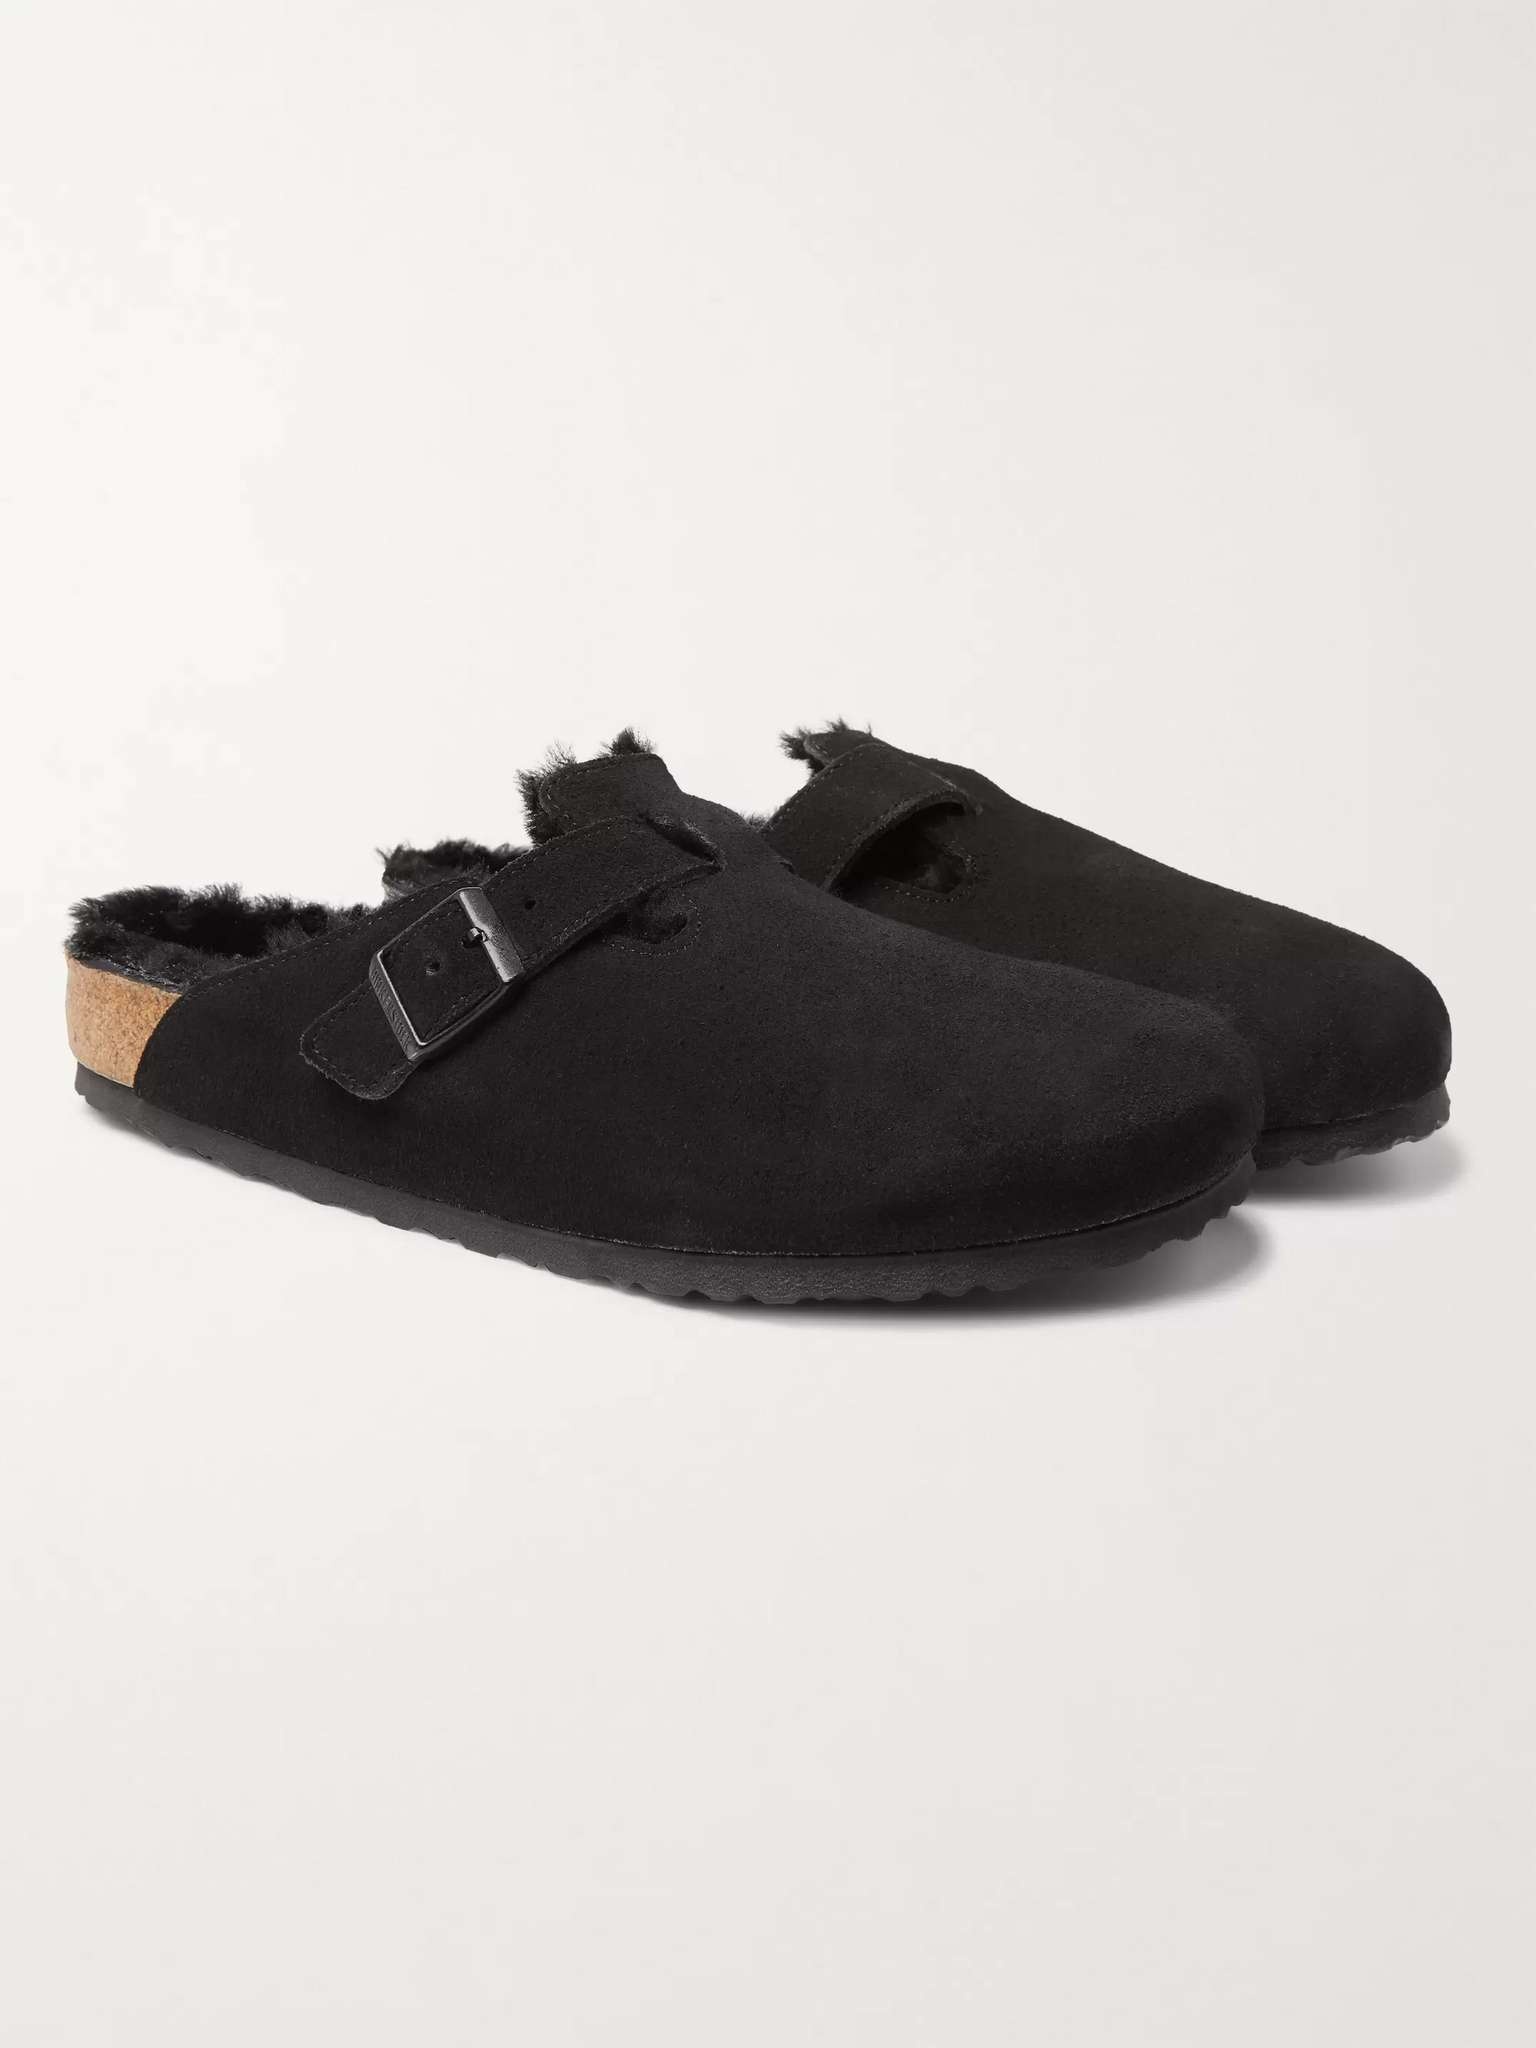 Boston Shearling-Lined Suede Clogs - 4